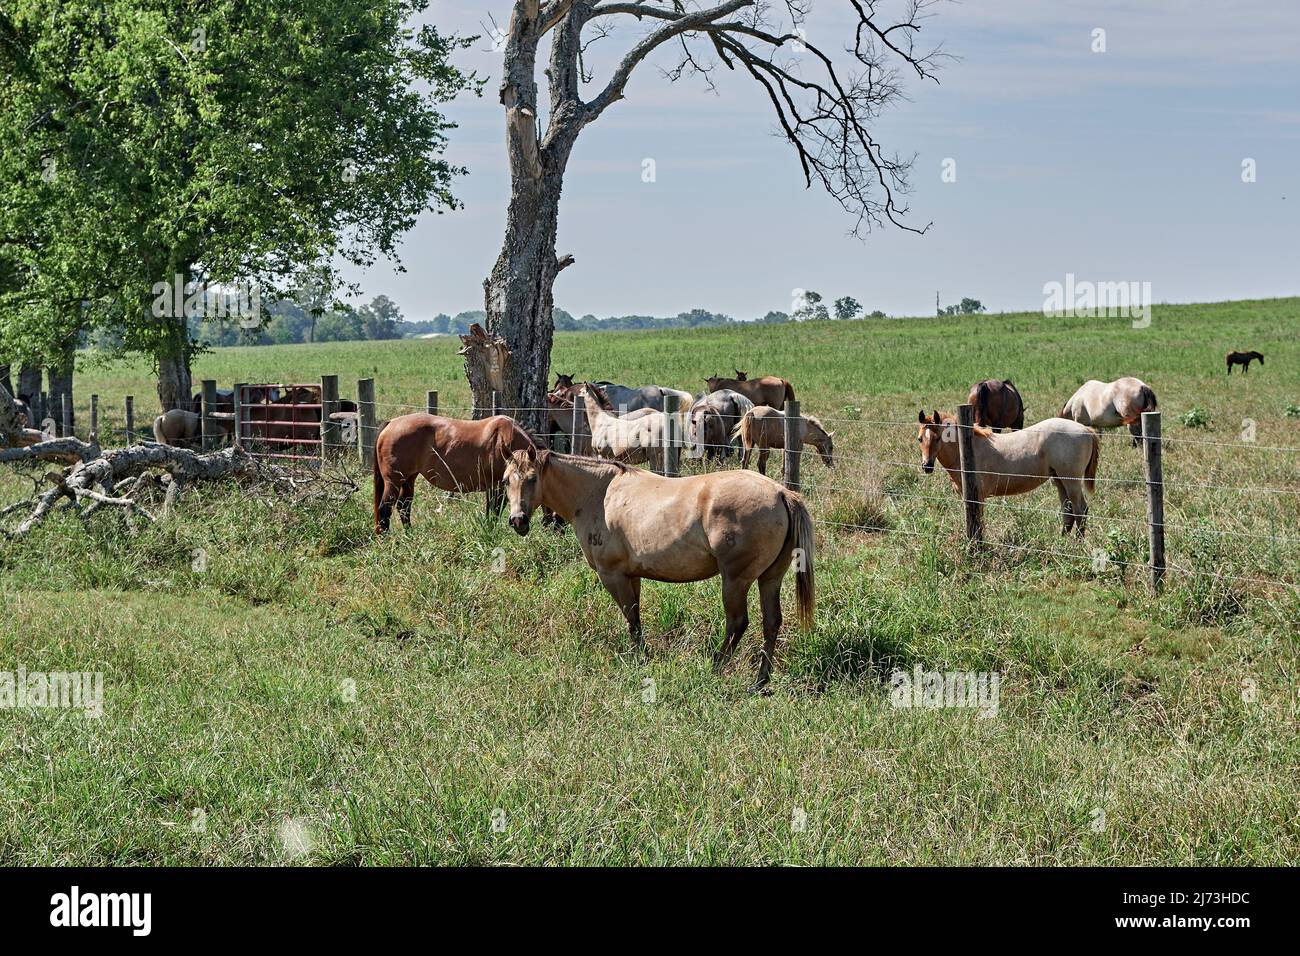 Horses grazing in a green pasture on a rural Alabama farm, USA. Stock Photo